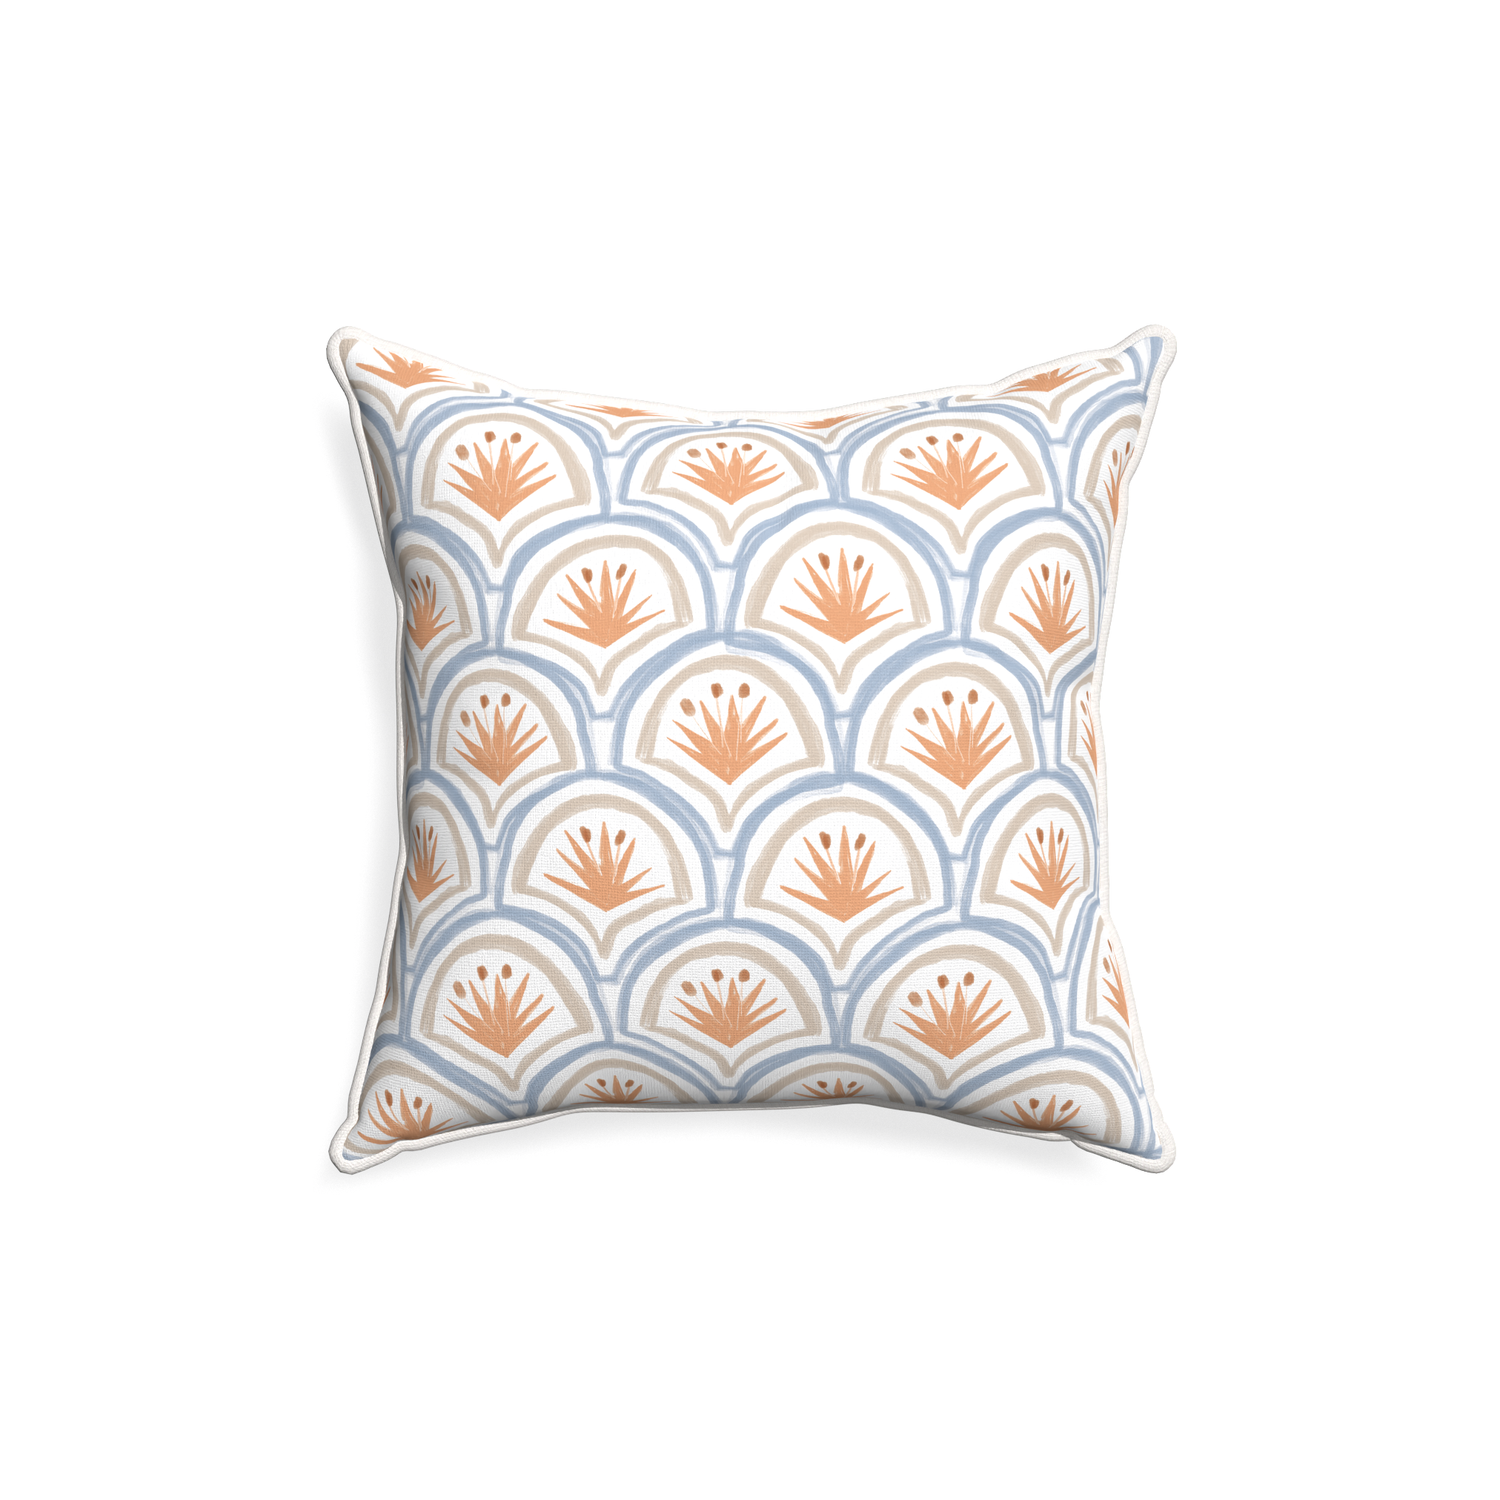 18-square thatcher apricot custom pillow with snow piping on white background